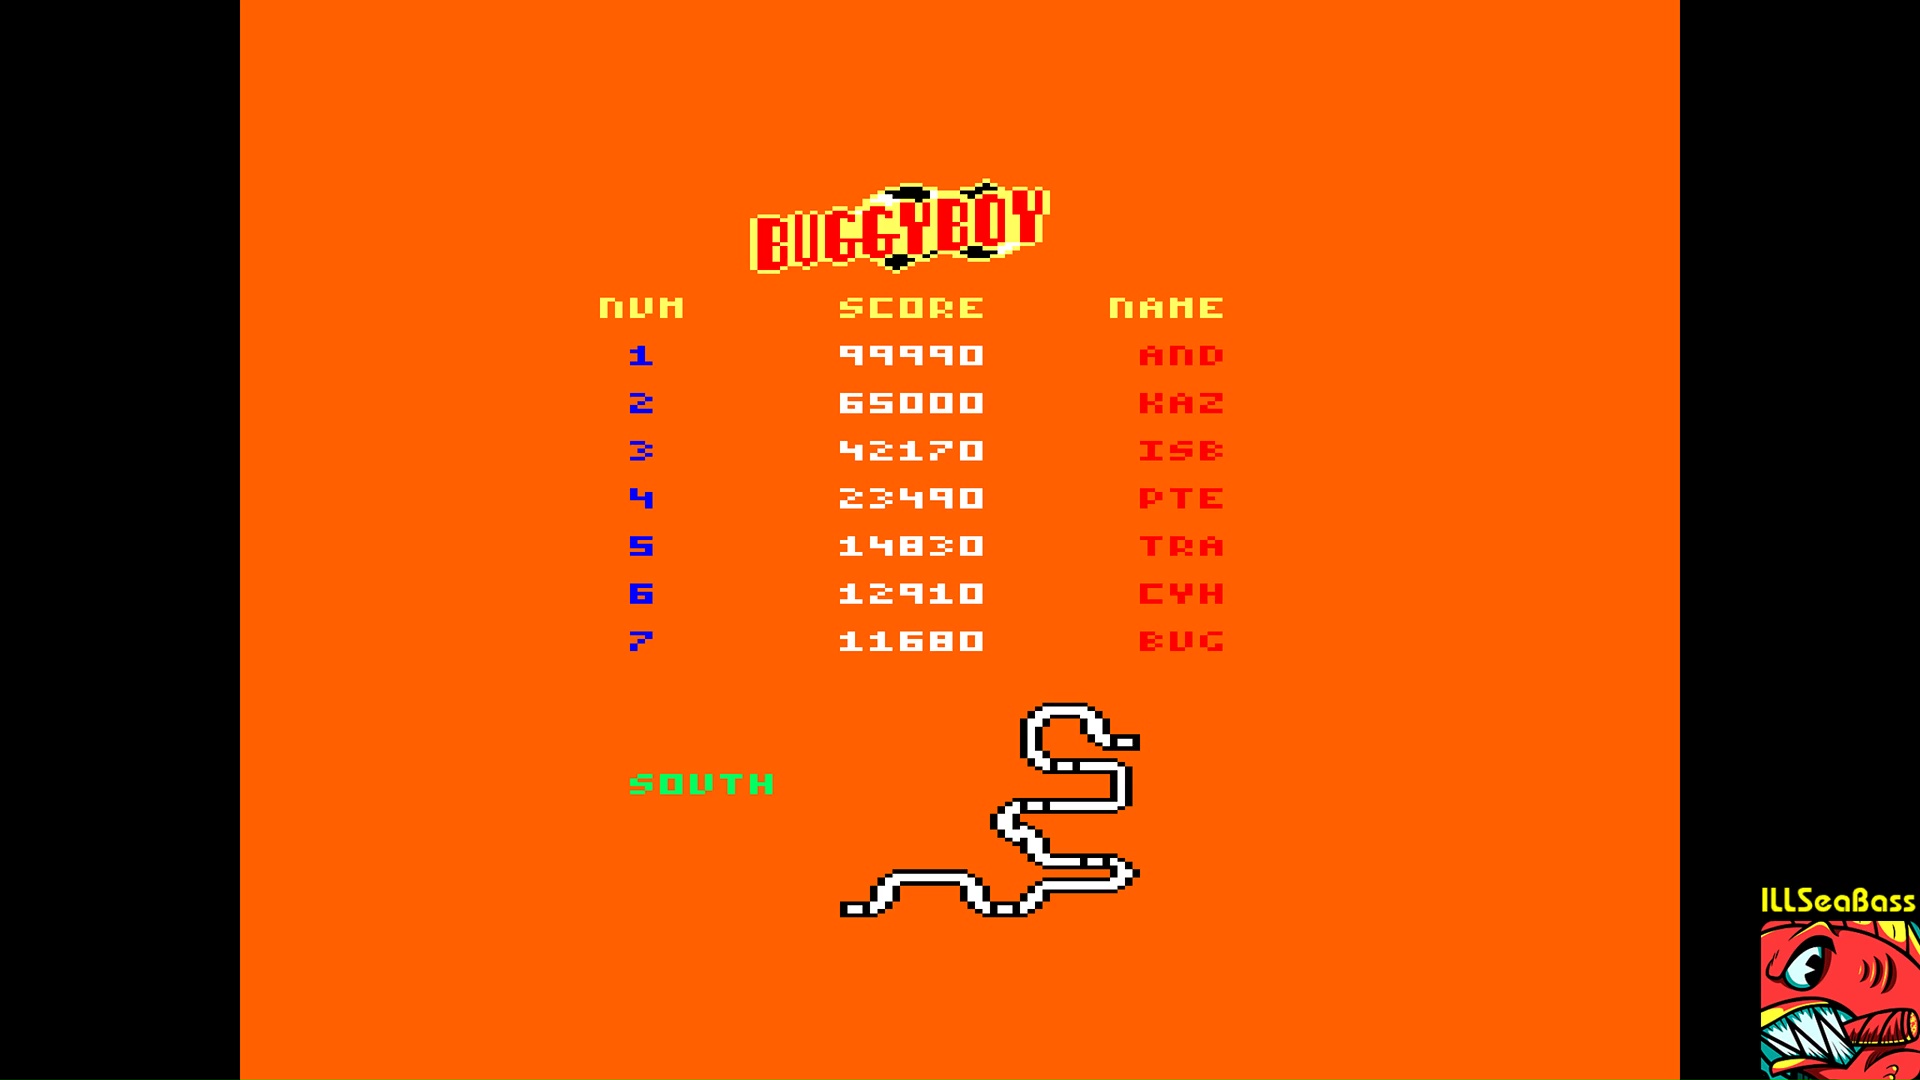 ILLSeaBass: Buggy Boy [South] (Amstrad CPC Emulated) 42,170 points on 2017-11-11 12:25:36